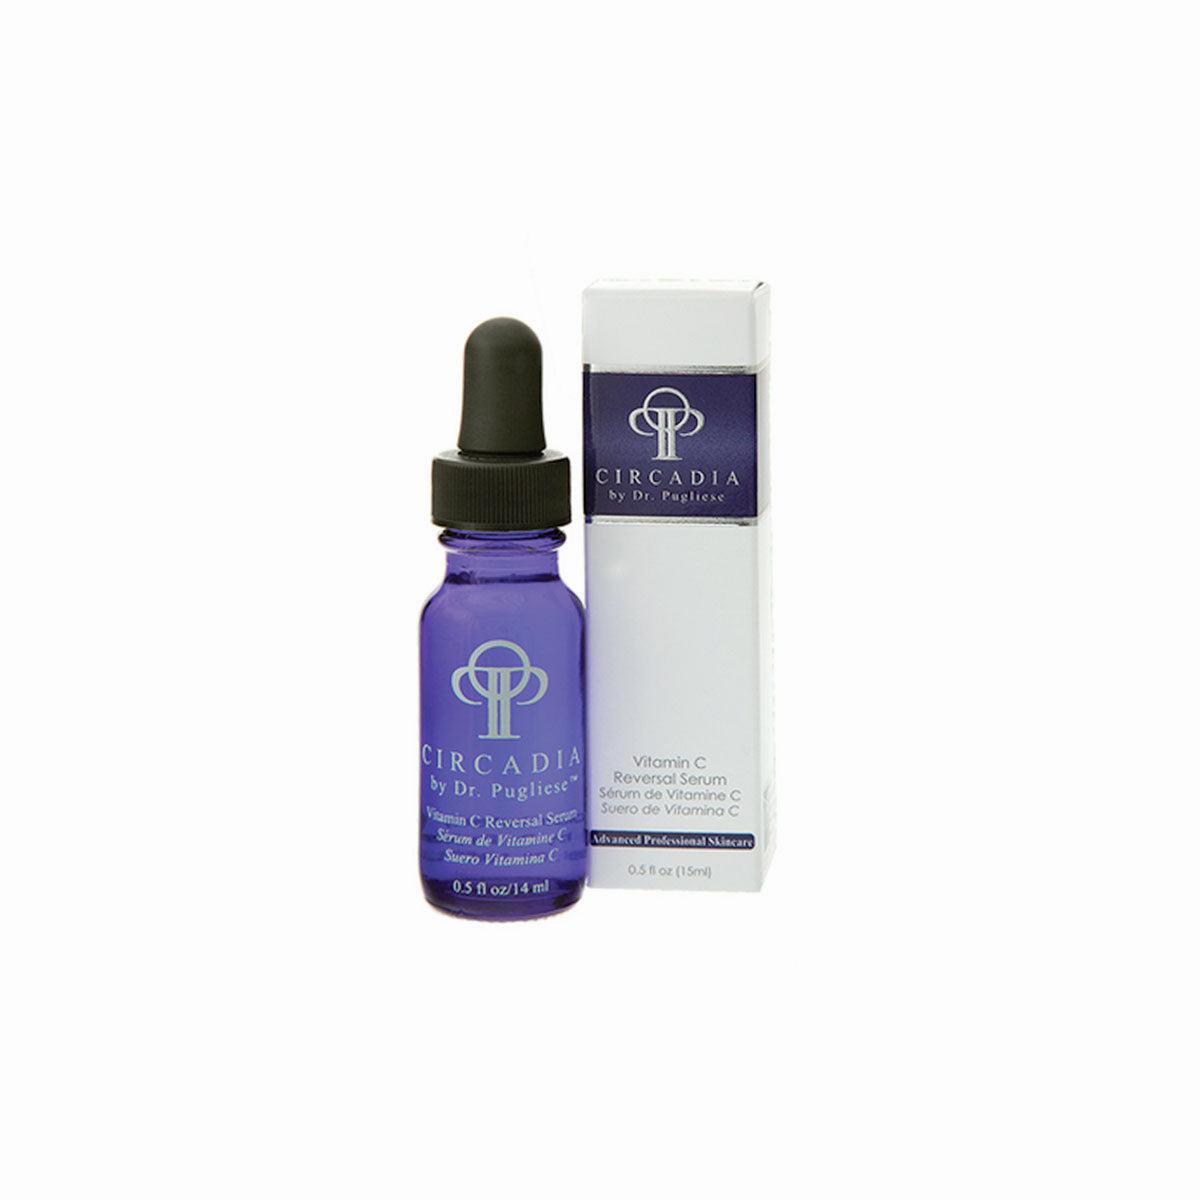 A purple glass bottle of Circadia Vitamin C Reversal Serum with a black dropper cap, and a white box with purple text.